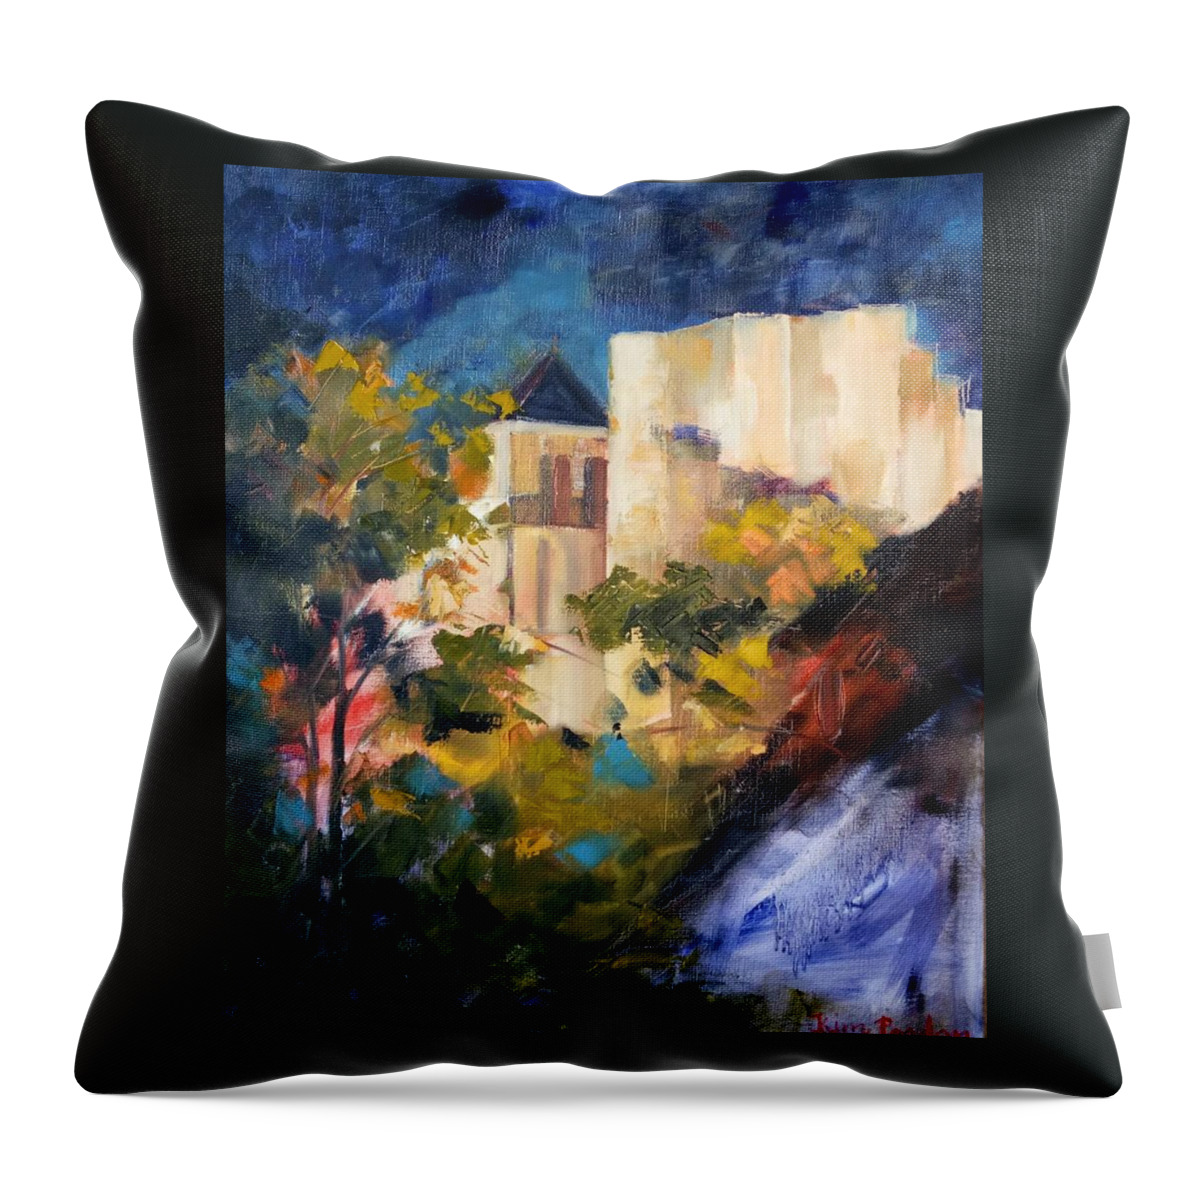  Throw Pillow featuring the painting Chauvigny by Night by Kim PARDON